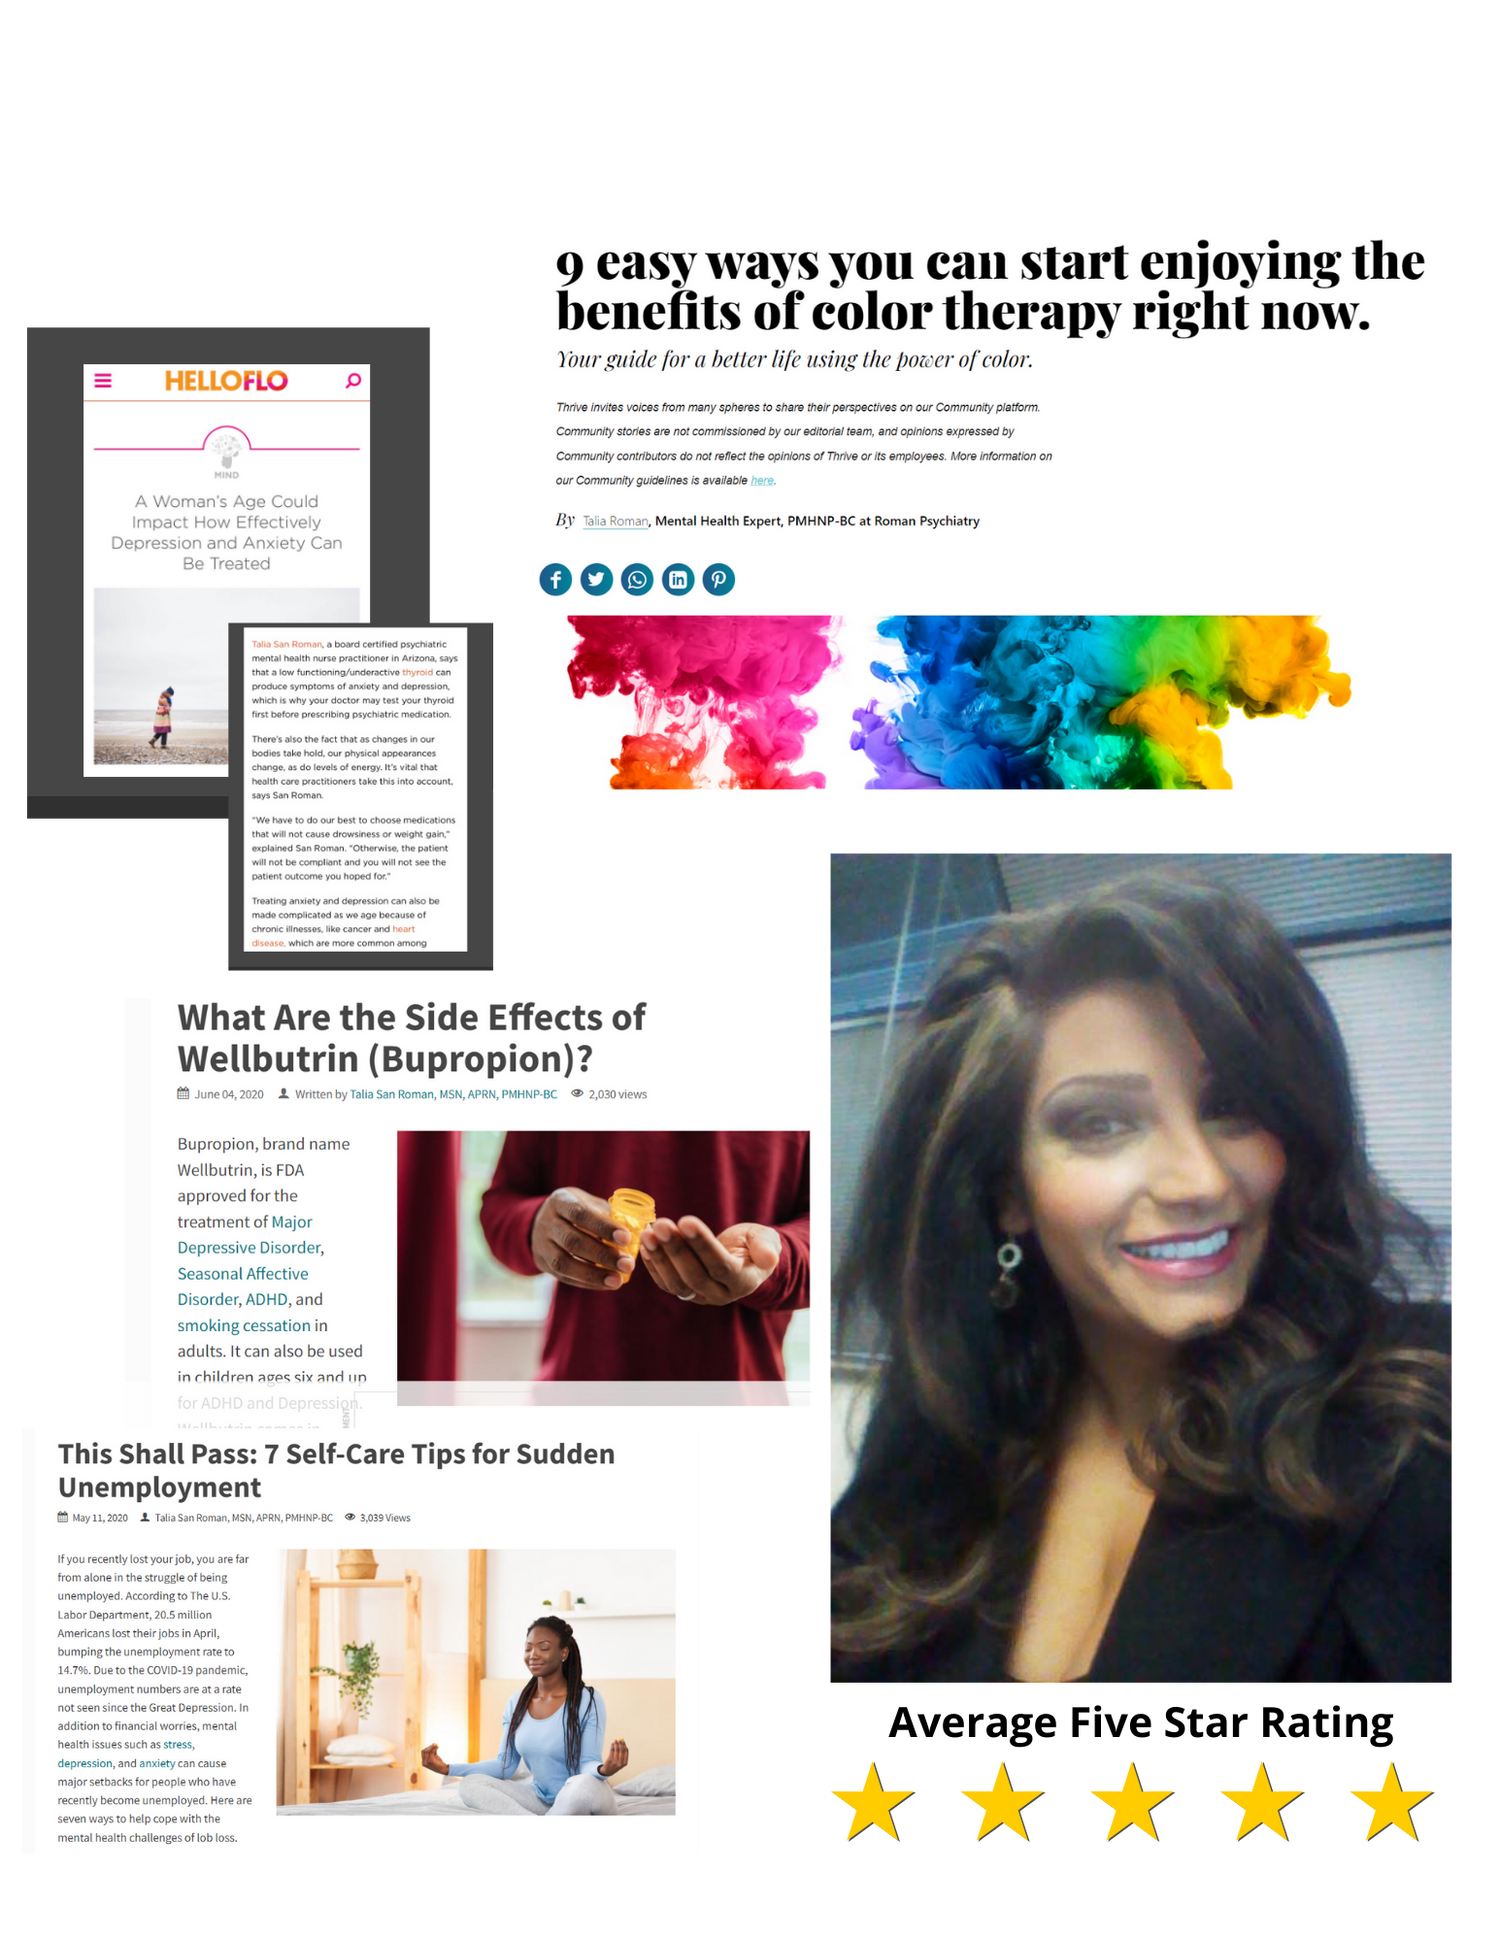 Gallery Photo of Talia Roman has been featured in national media for her mental health expertise and has an average five star rating.